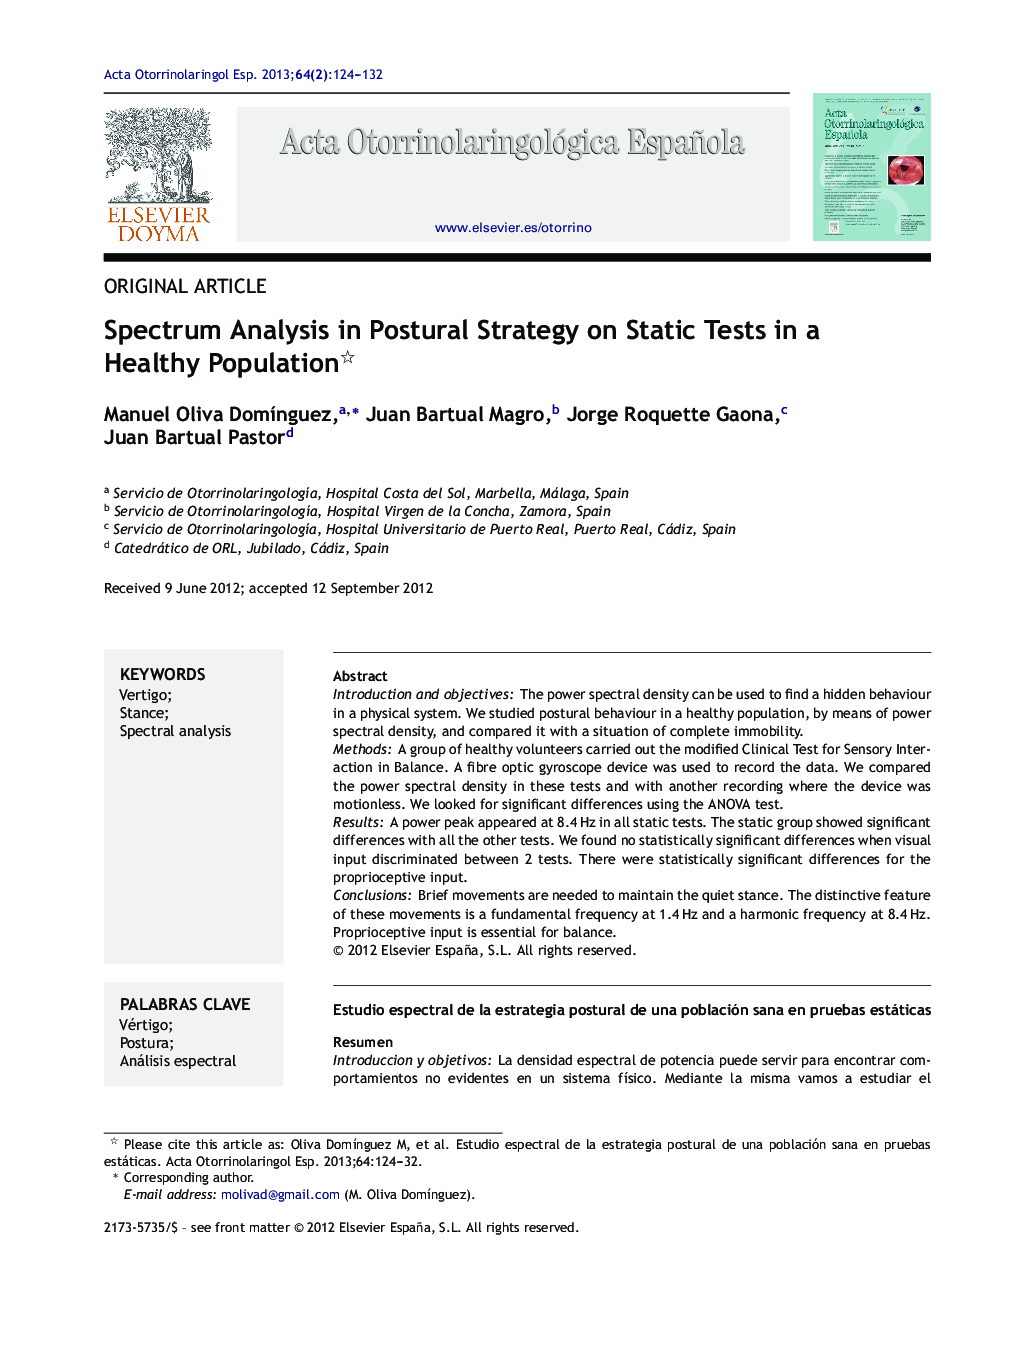 Spectrum Analysis in Postural Strategy on Static Tests in a Healthy Population 